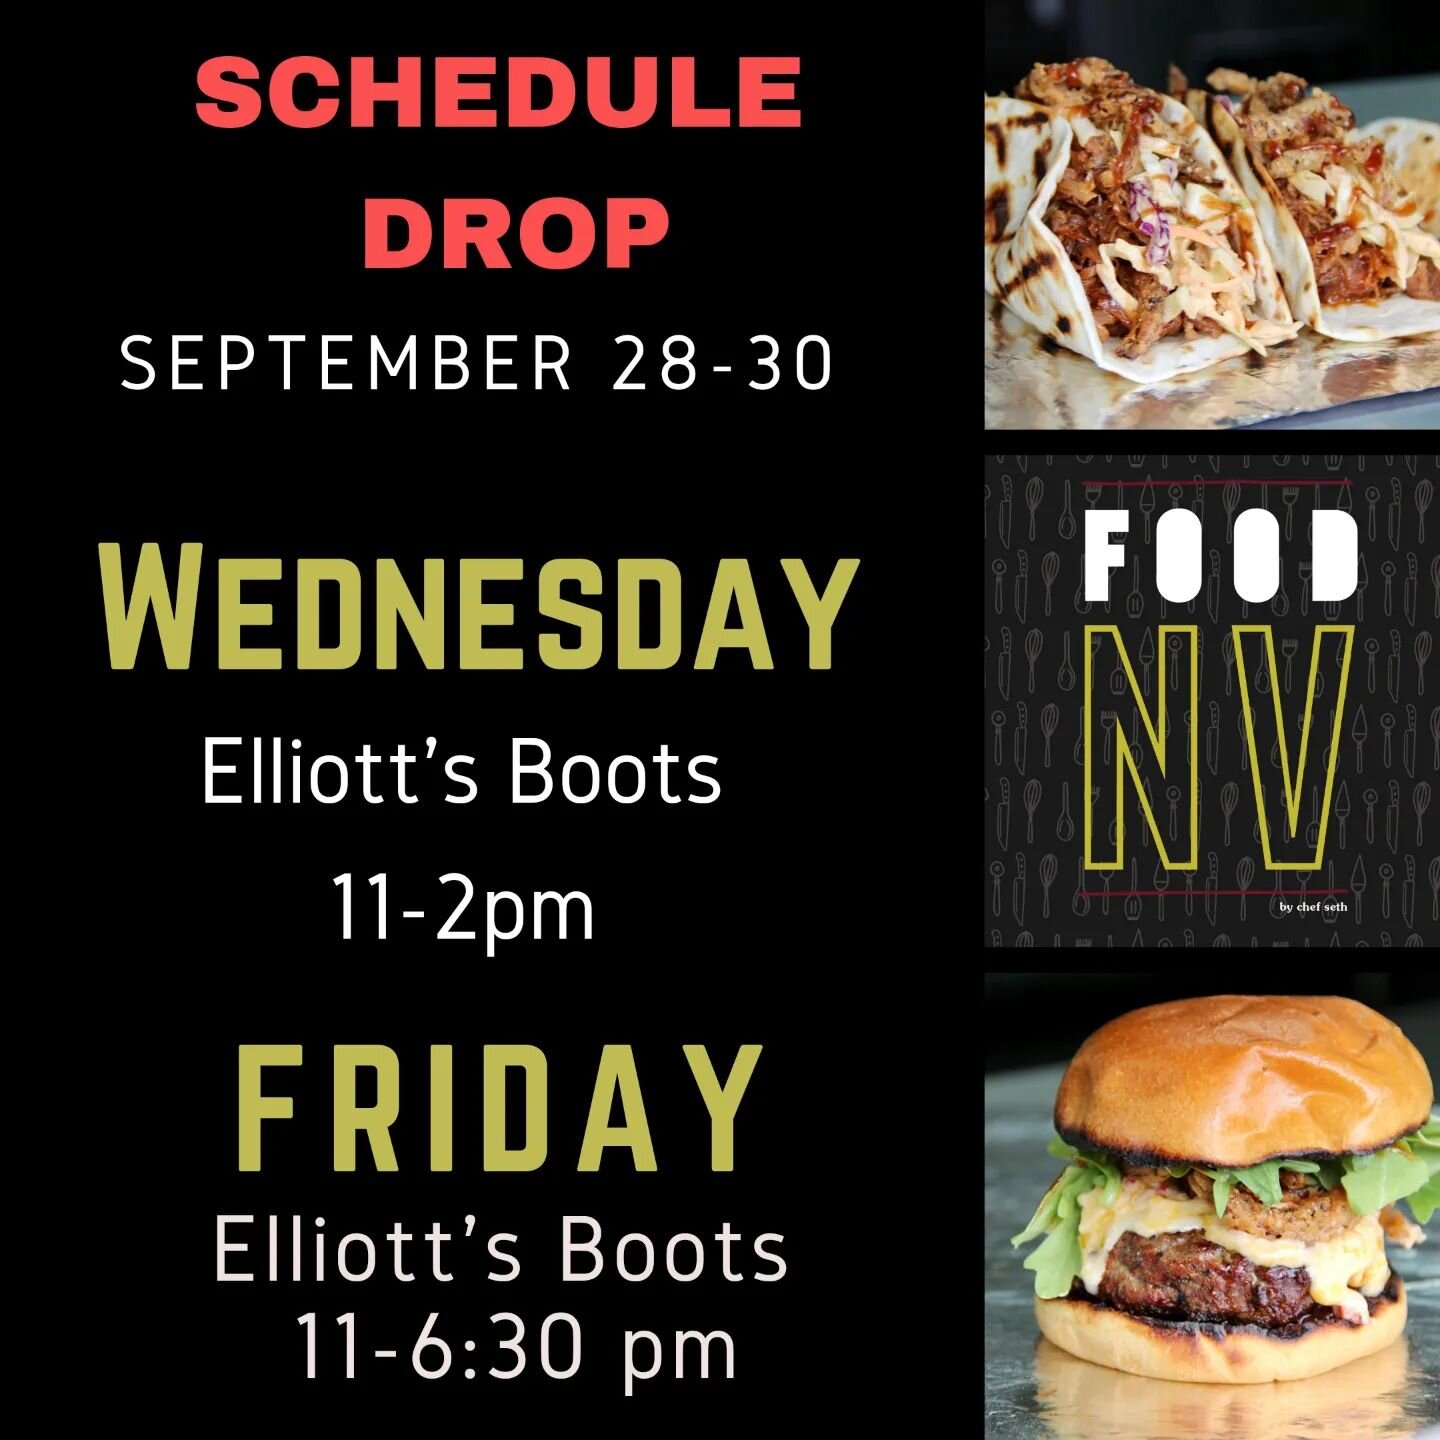 🚨SCHEDULE DROP🚨
 September 28-30
🔔🔔 COME AND GET IT!!!!
We've got the🧀 pimento cheese🧀 that'll make you weak in the knees!
The🌮 Bbq Tacos🌮that will make you rocko.(I'll admit, that one was a stretch but they are seriously good tacos) 😋Anyway